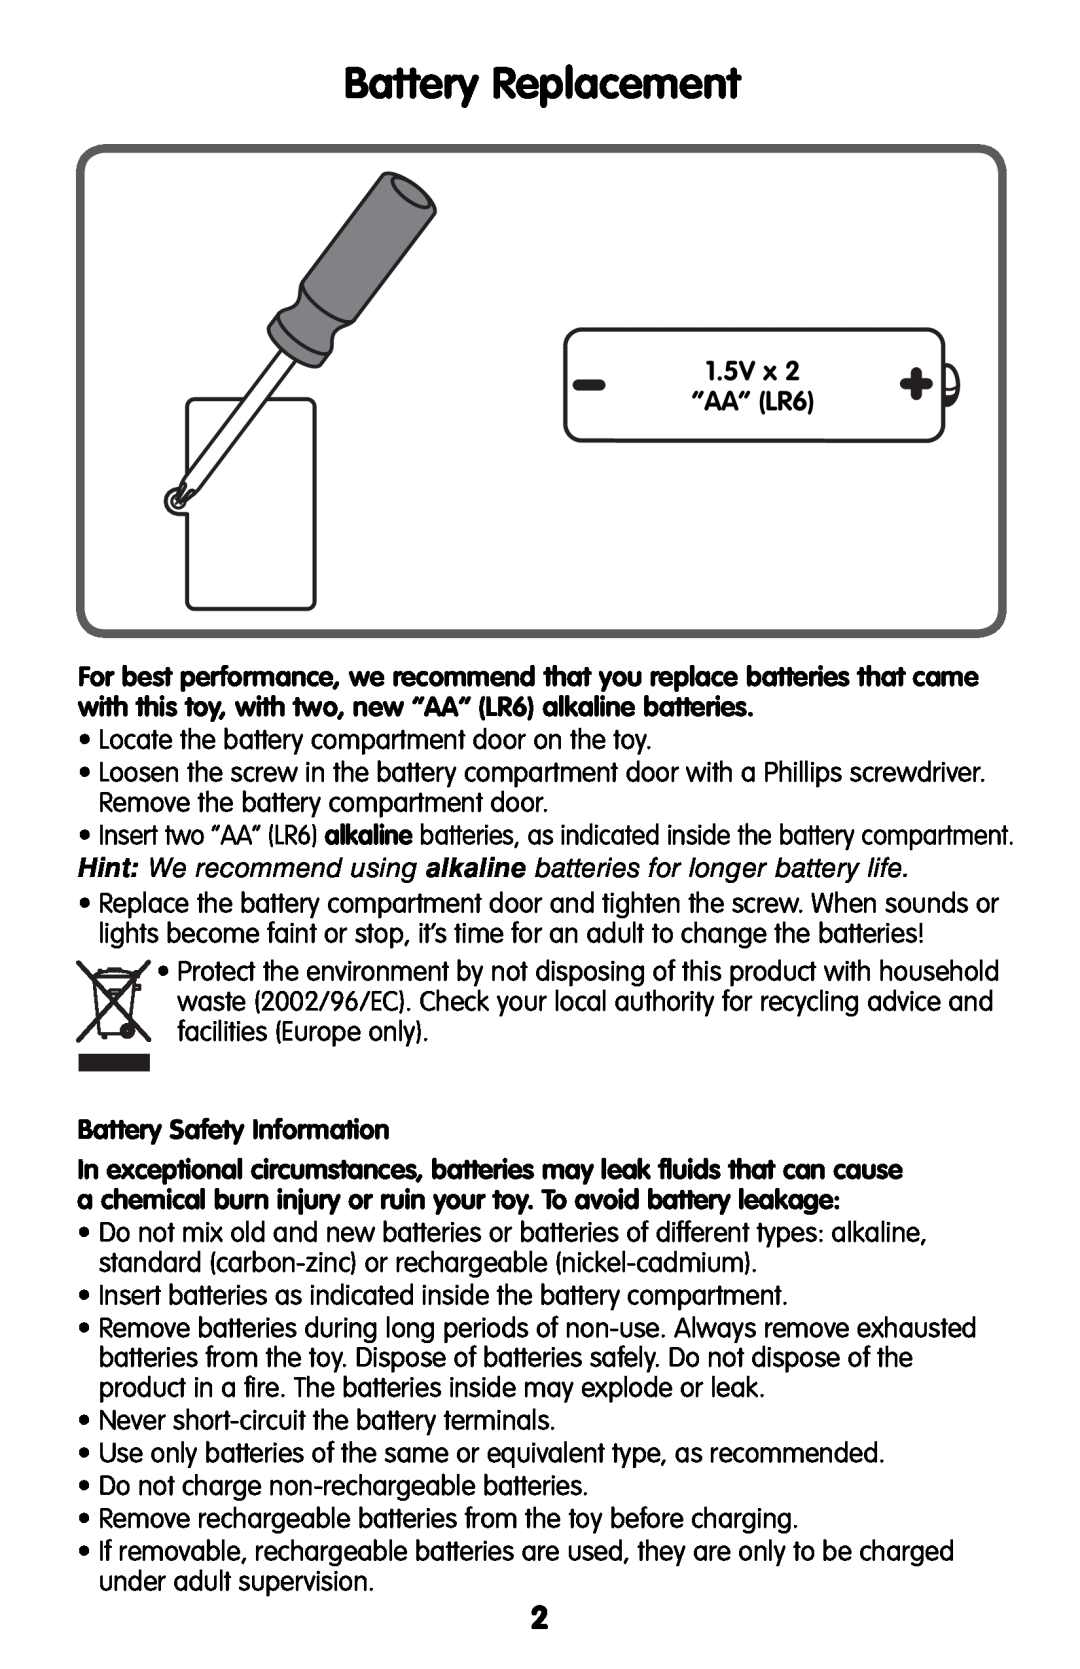 Fisher-Price L3940 instruction sheet Battery Replacement, 1.5V x “AA” LR6, Battery Safety Information 